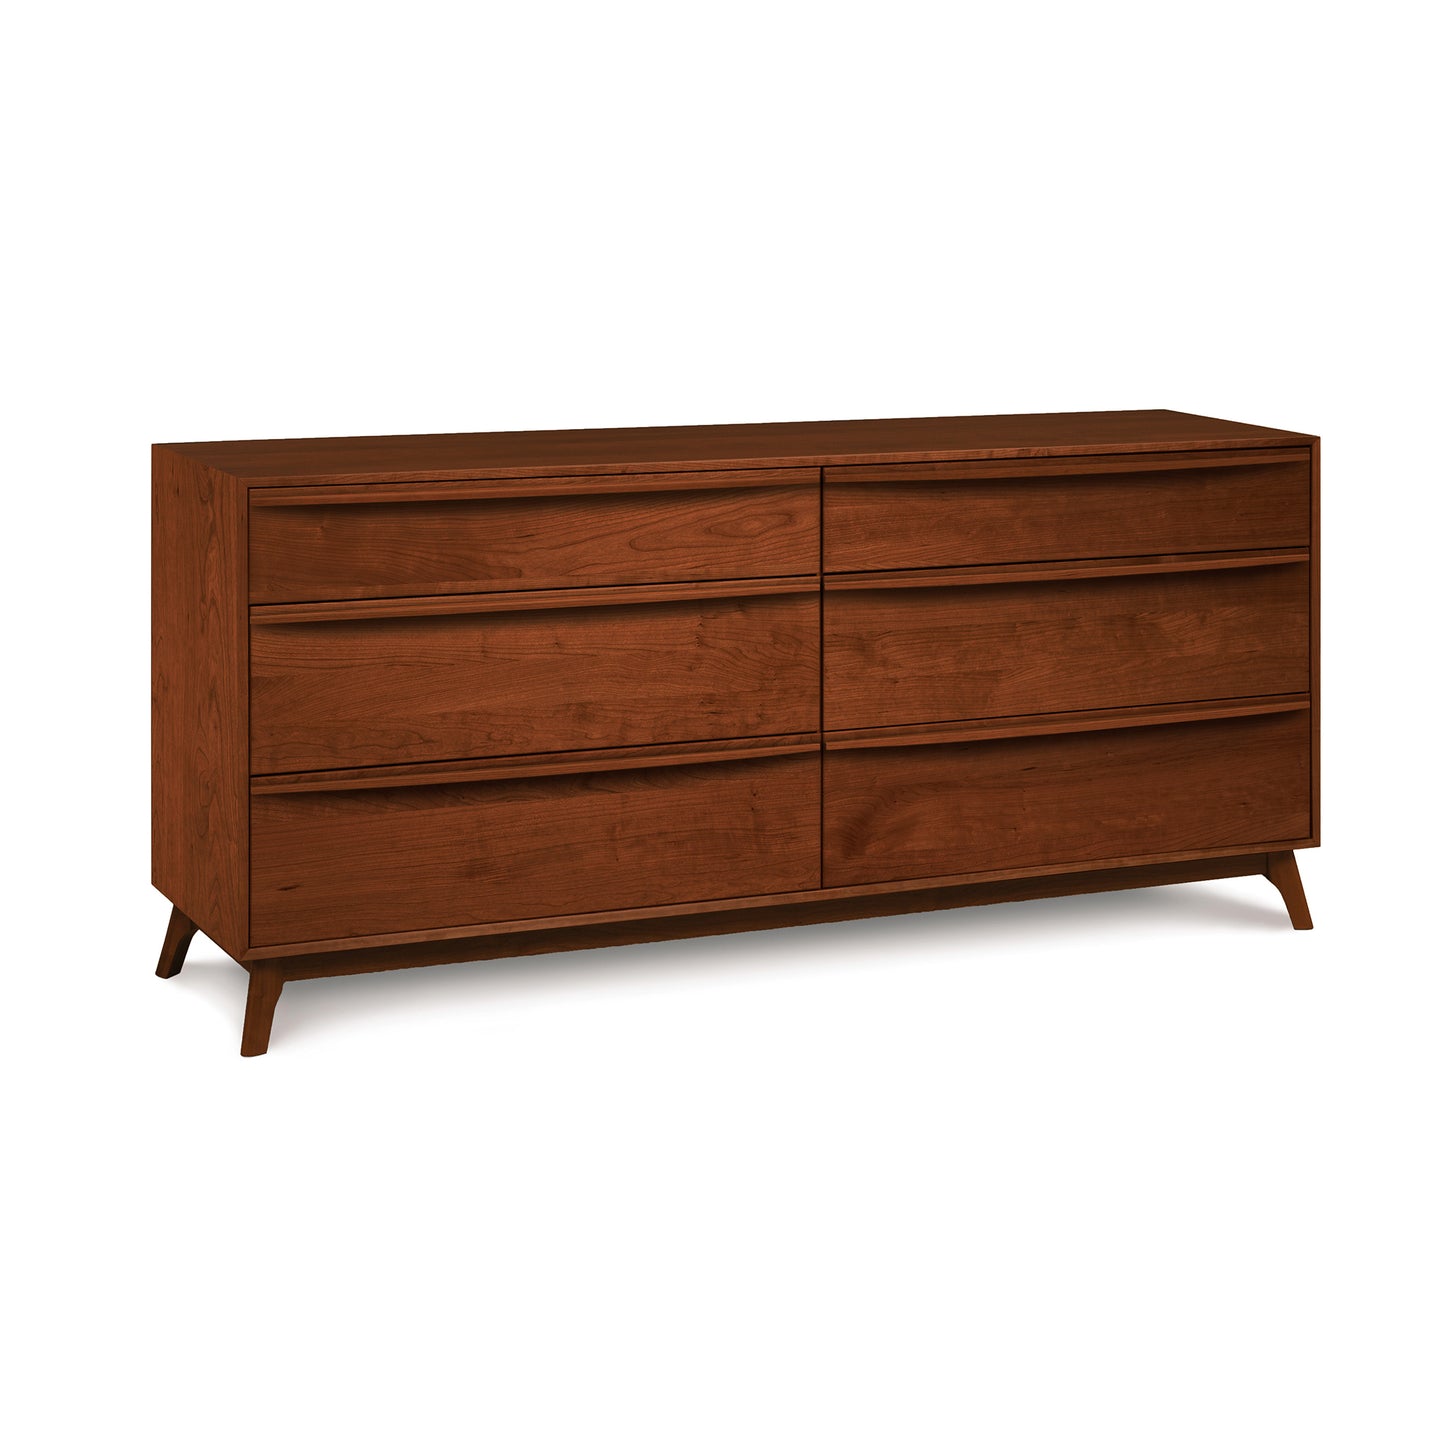 A modern Copeland Furniture Catalina 6-Drawer Dresser made from solid natural hardwood with six drawers and angled legs on a white background.